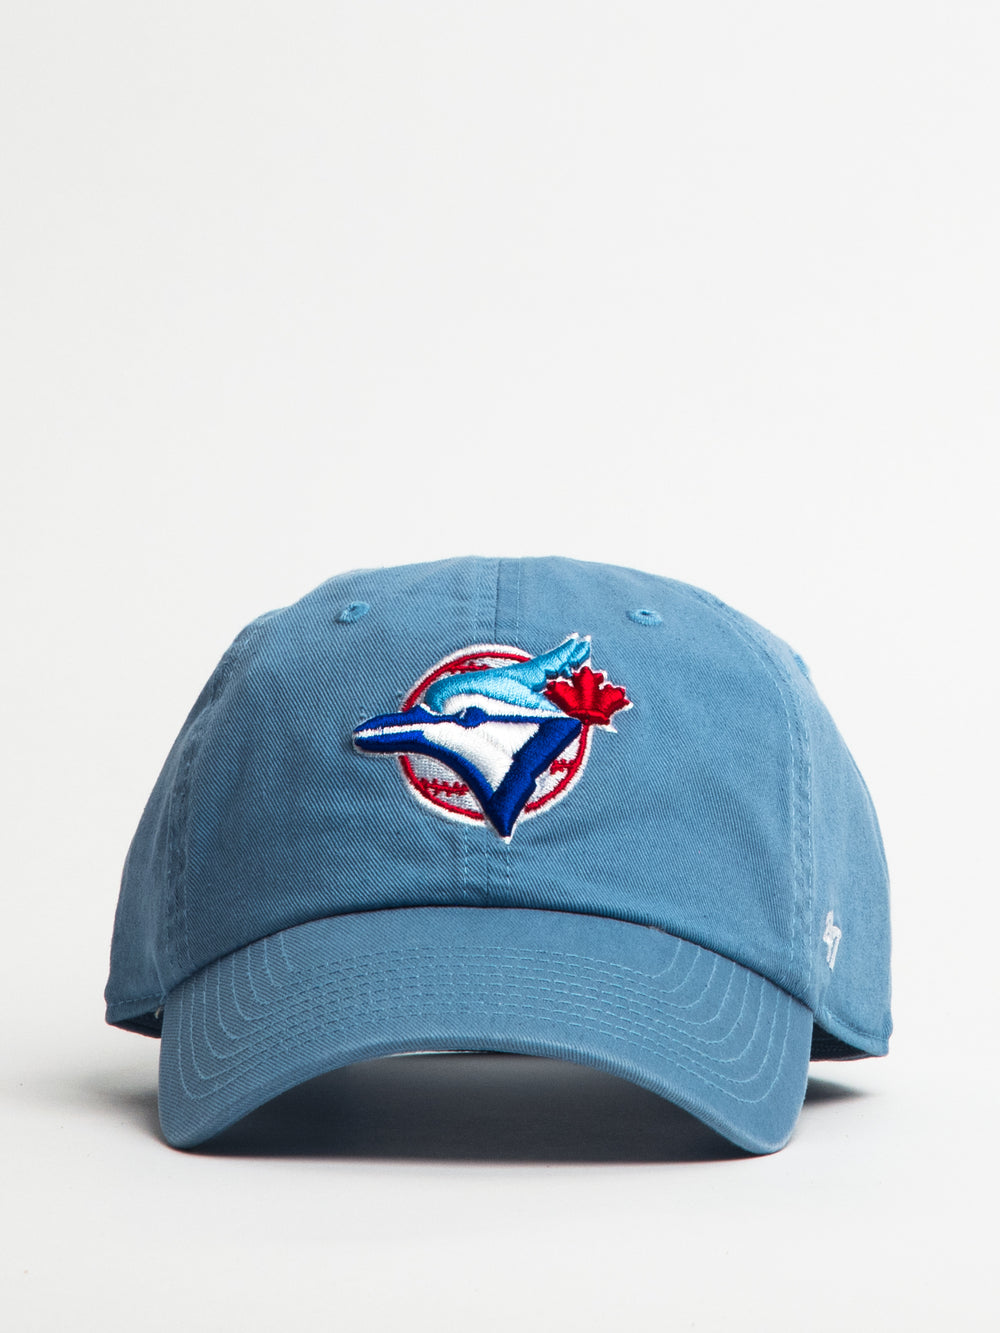 47 MLB BLUE JAYS COOPERSTOWN CLEAN UP HAT